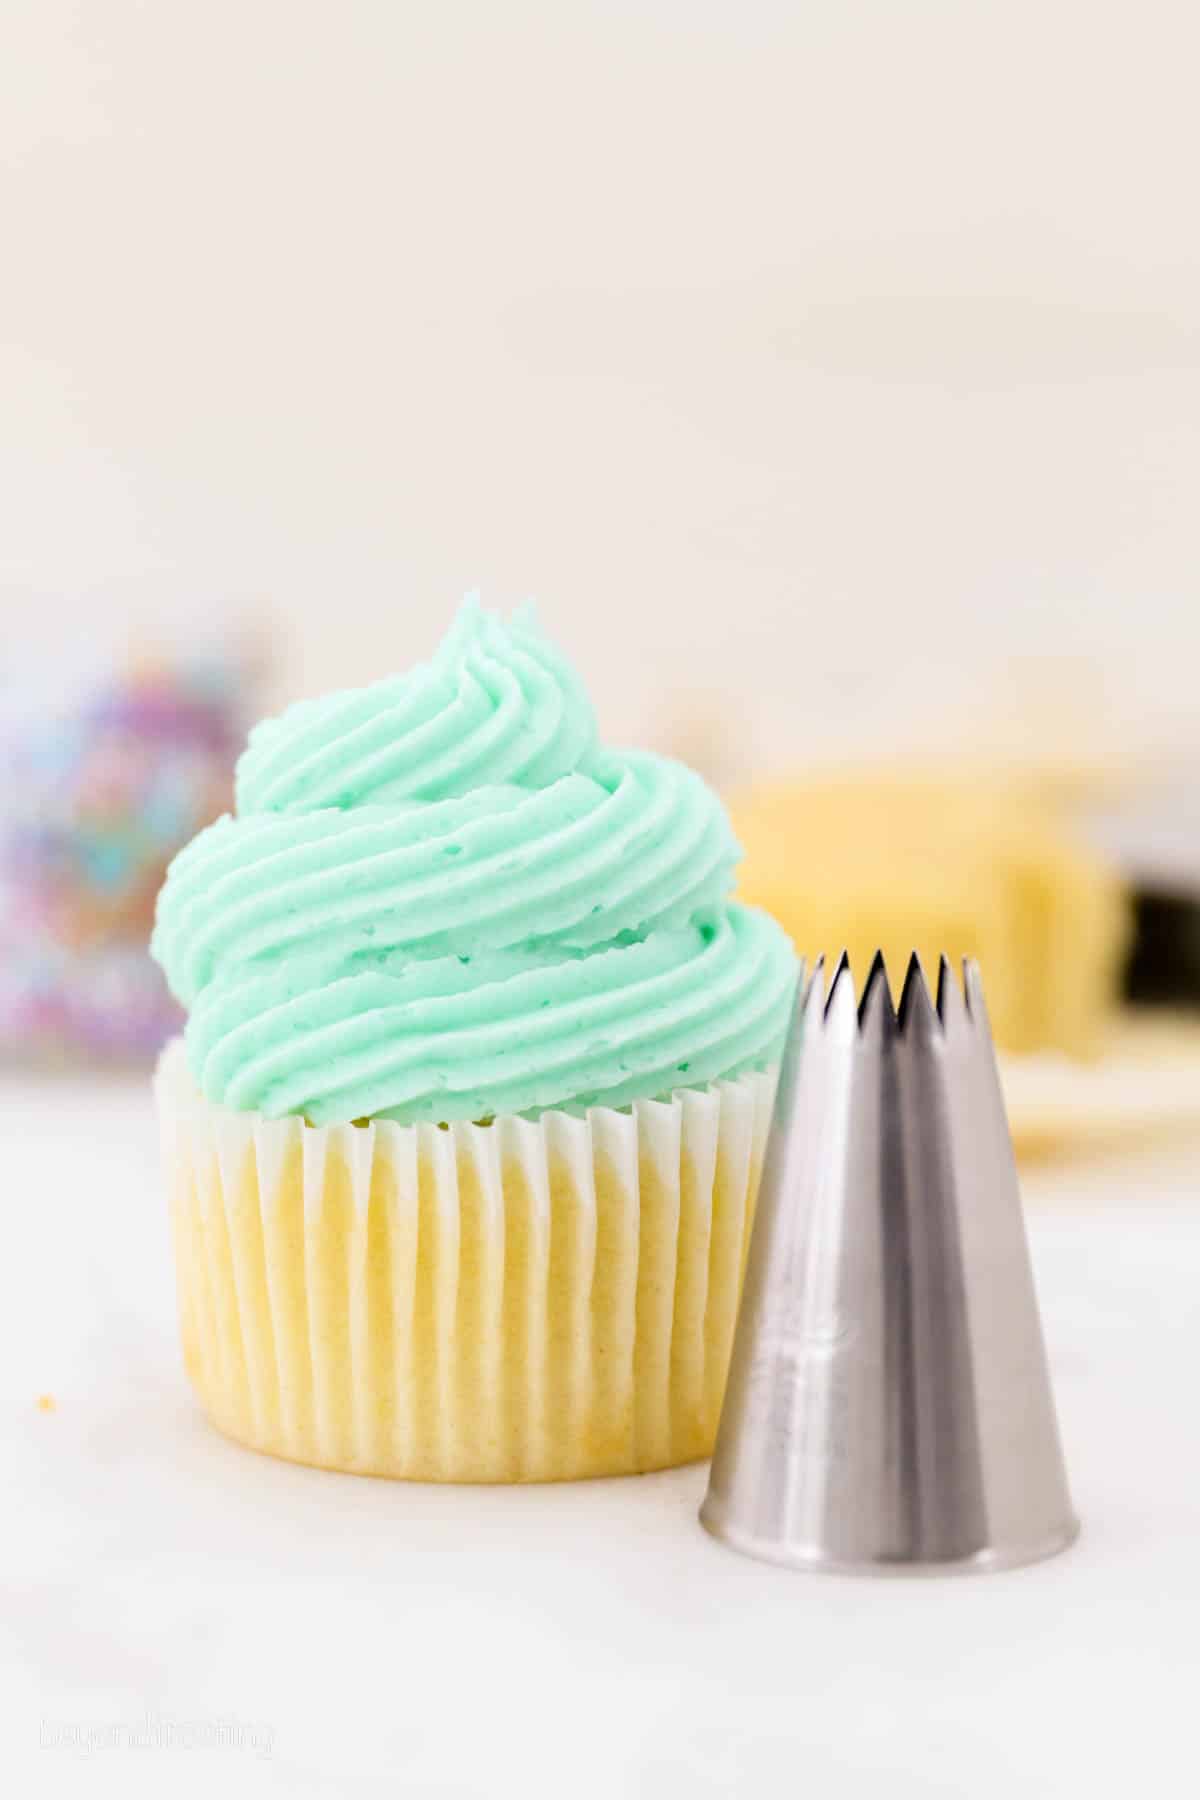 A cupcake frosted with a swirl of teal buttercream piped from a large French Star piping tip.